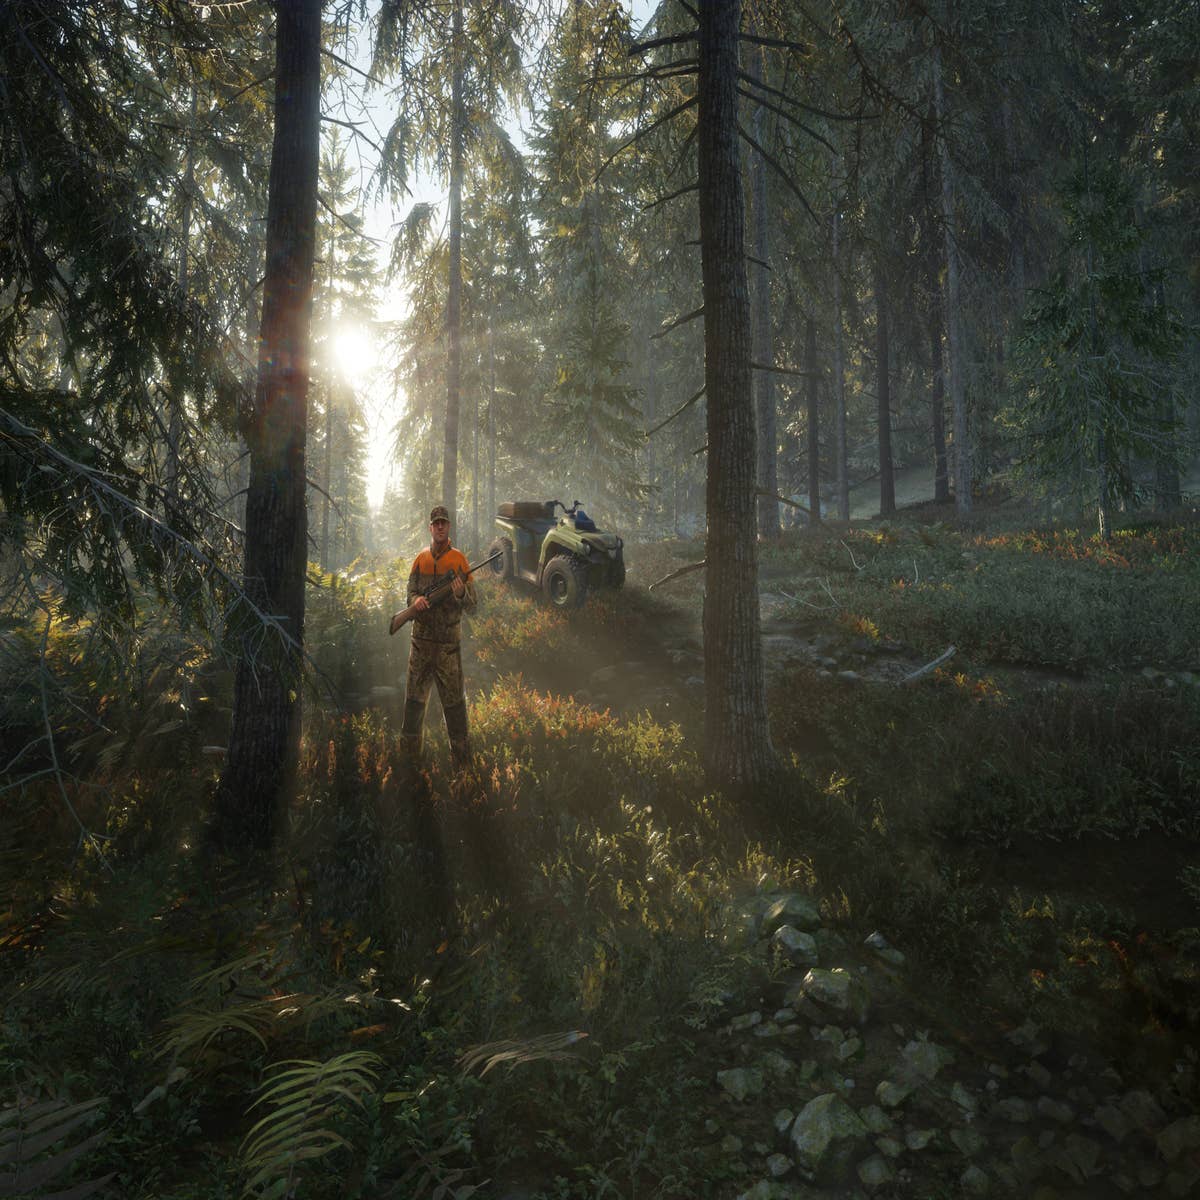 theHunter: Call of the Wild is Available Now! - Avalanche Studios